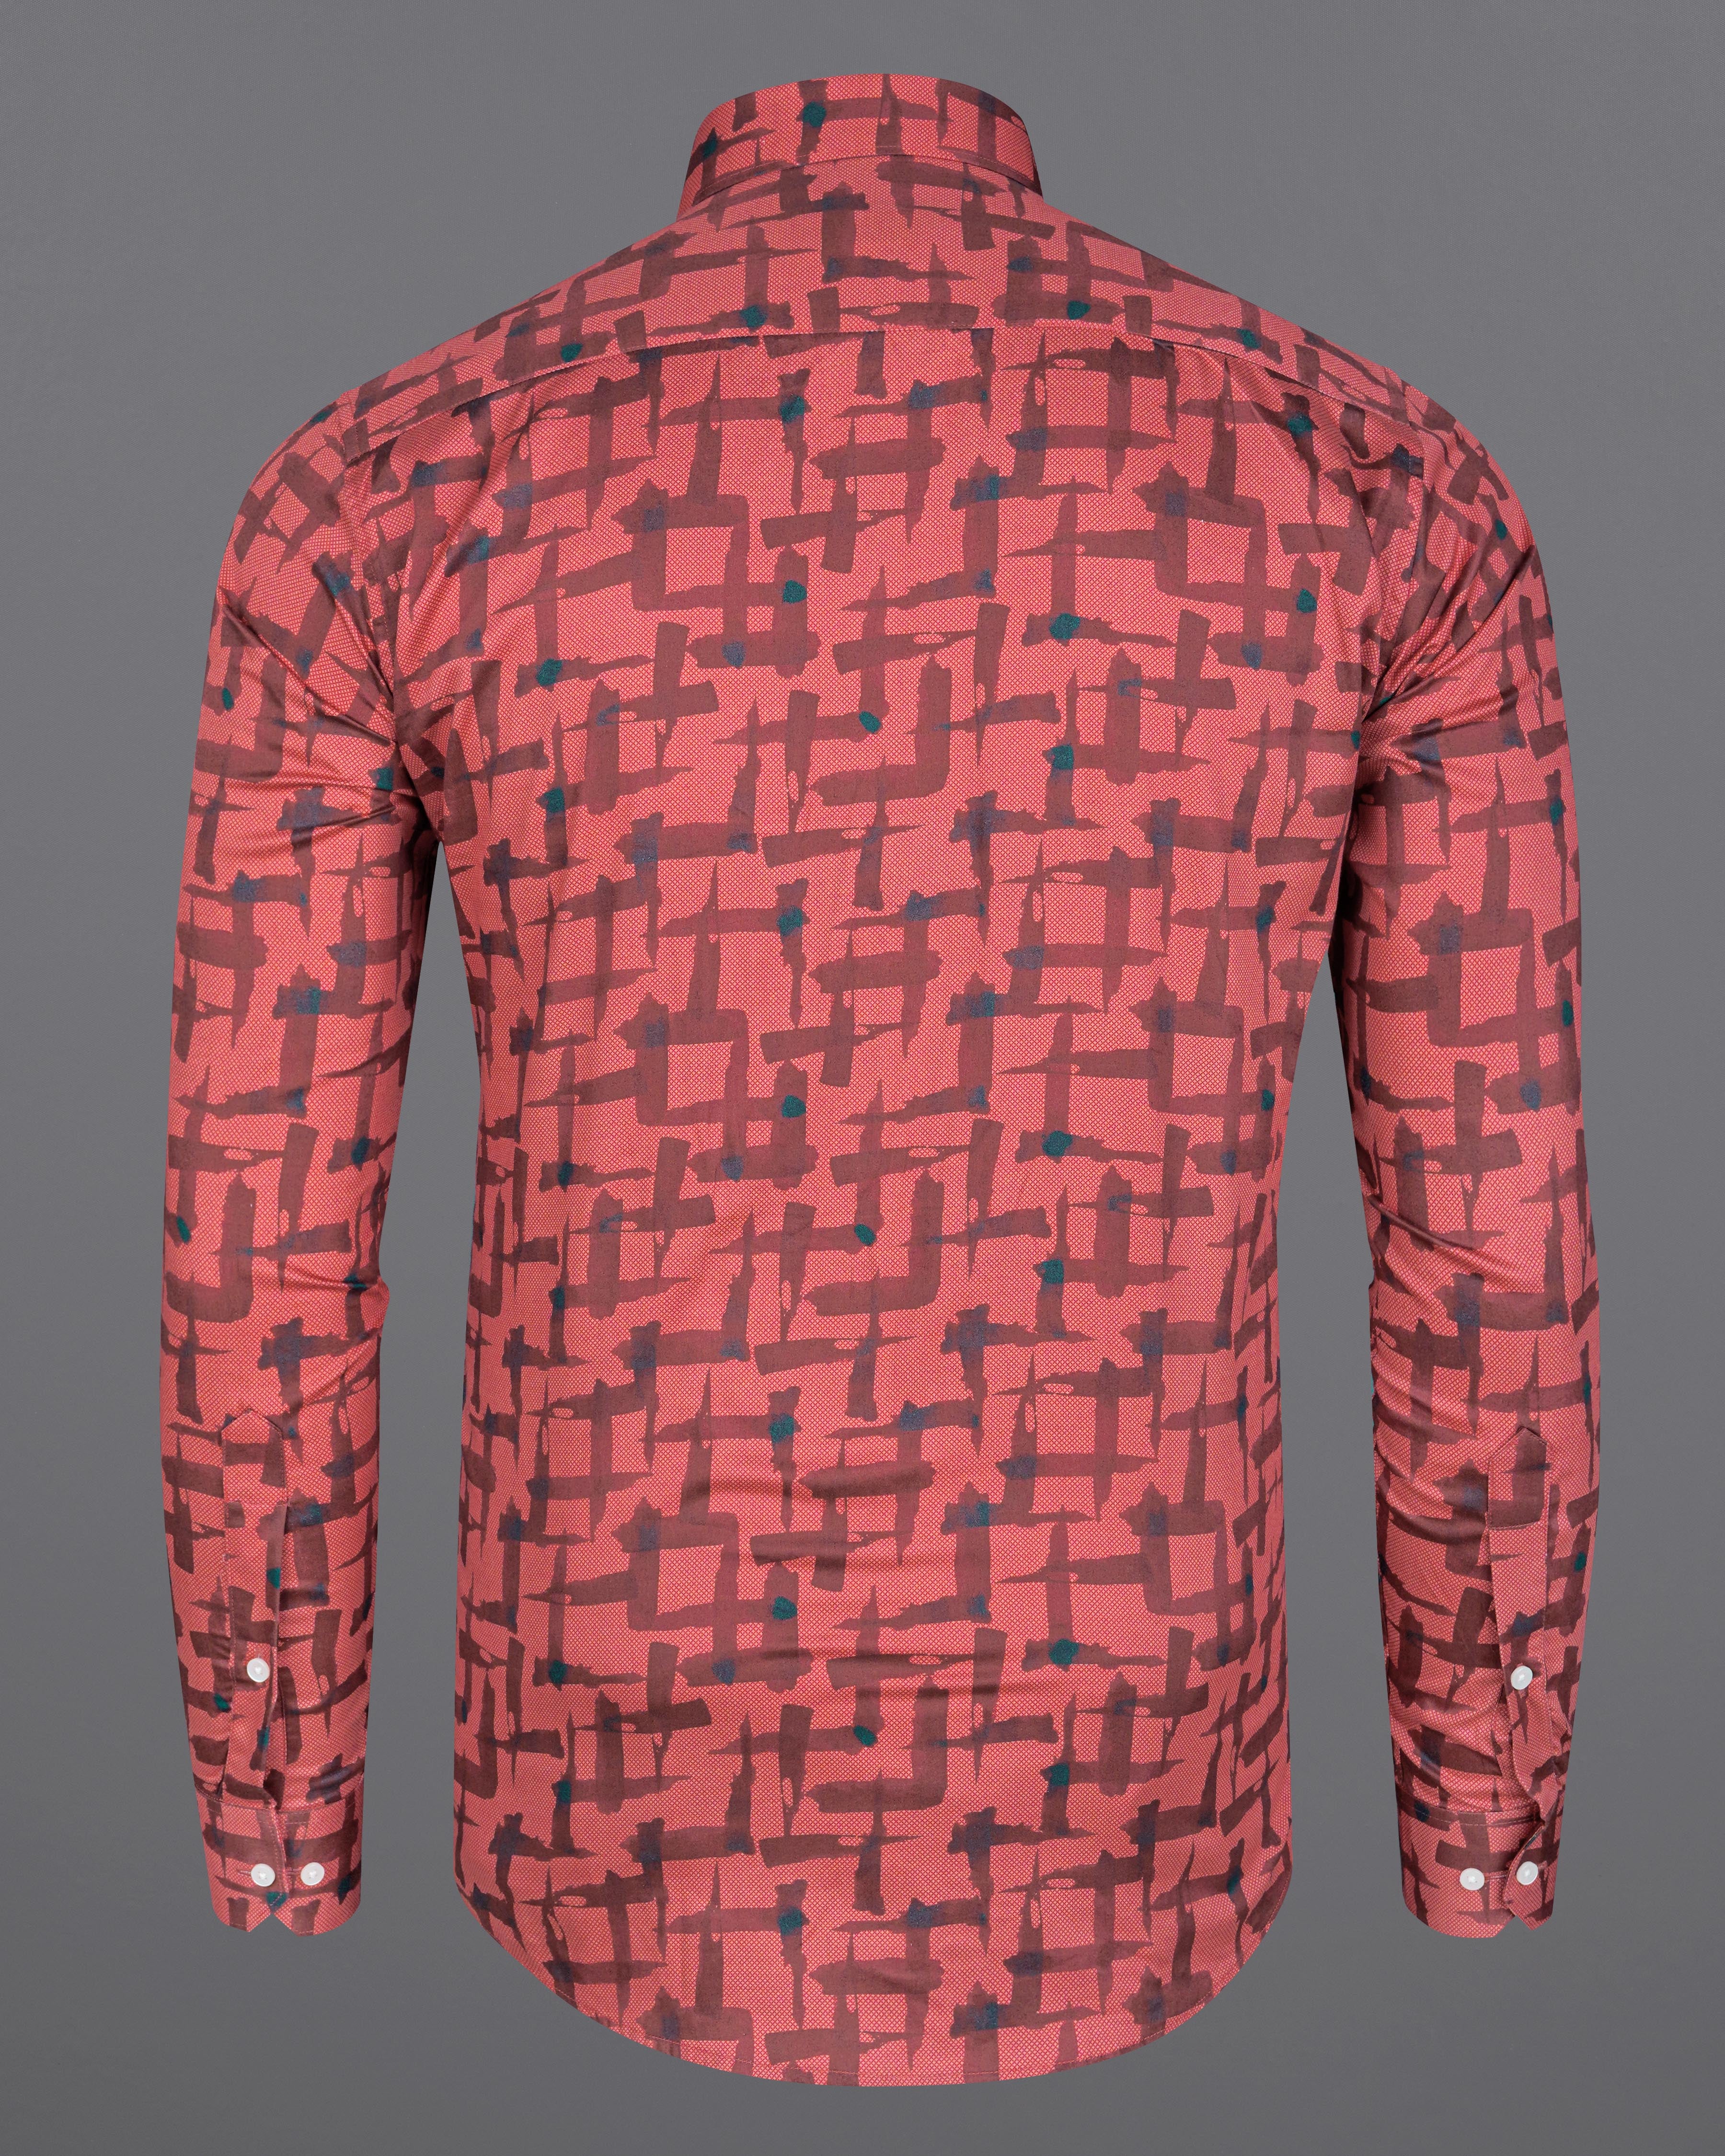 Pastel Pink with Deep Coffee Brown Abstract Printed  Super Soft Premium Cotton Shirt 8190 -38,8190 -H-38,8190 -39,8190 -H-39,8190 -40,8190 -H-40,8190 -42,8190 -H-42,8190 -44,8190 -H-44,8190 -46,8190 -H-46,8190 -48,8190 -H-48,8190 -50,8190 -H-50,8190 -52,8190 -H-52